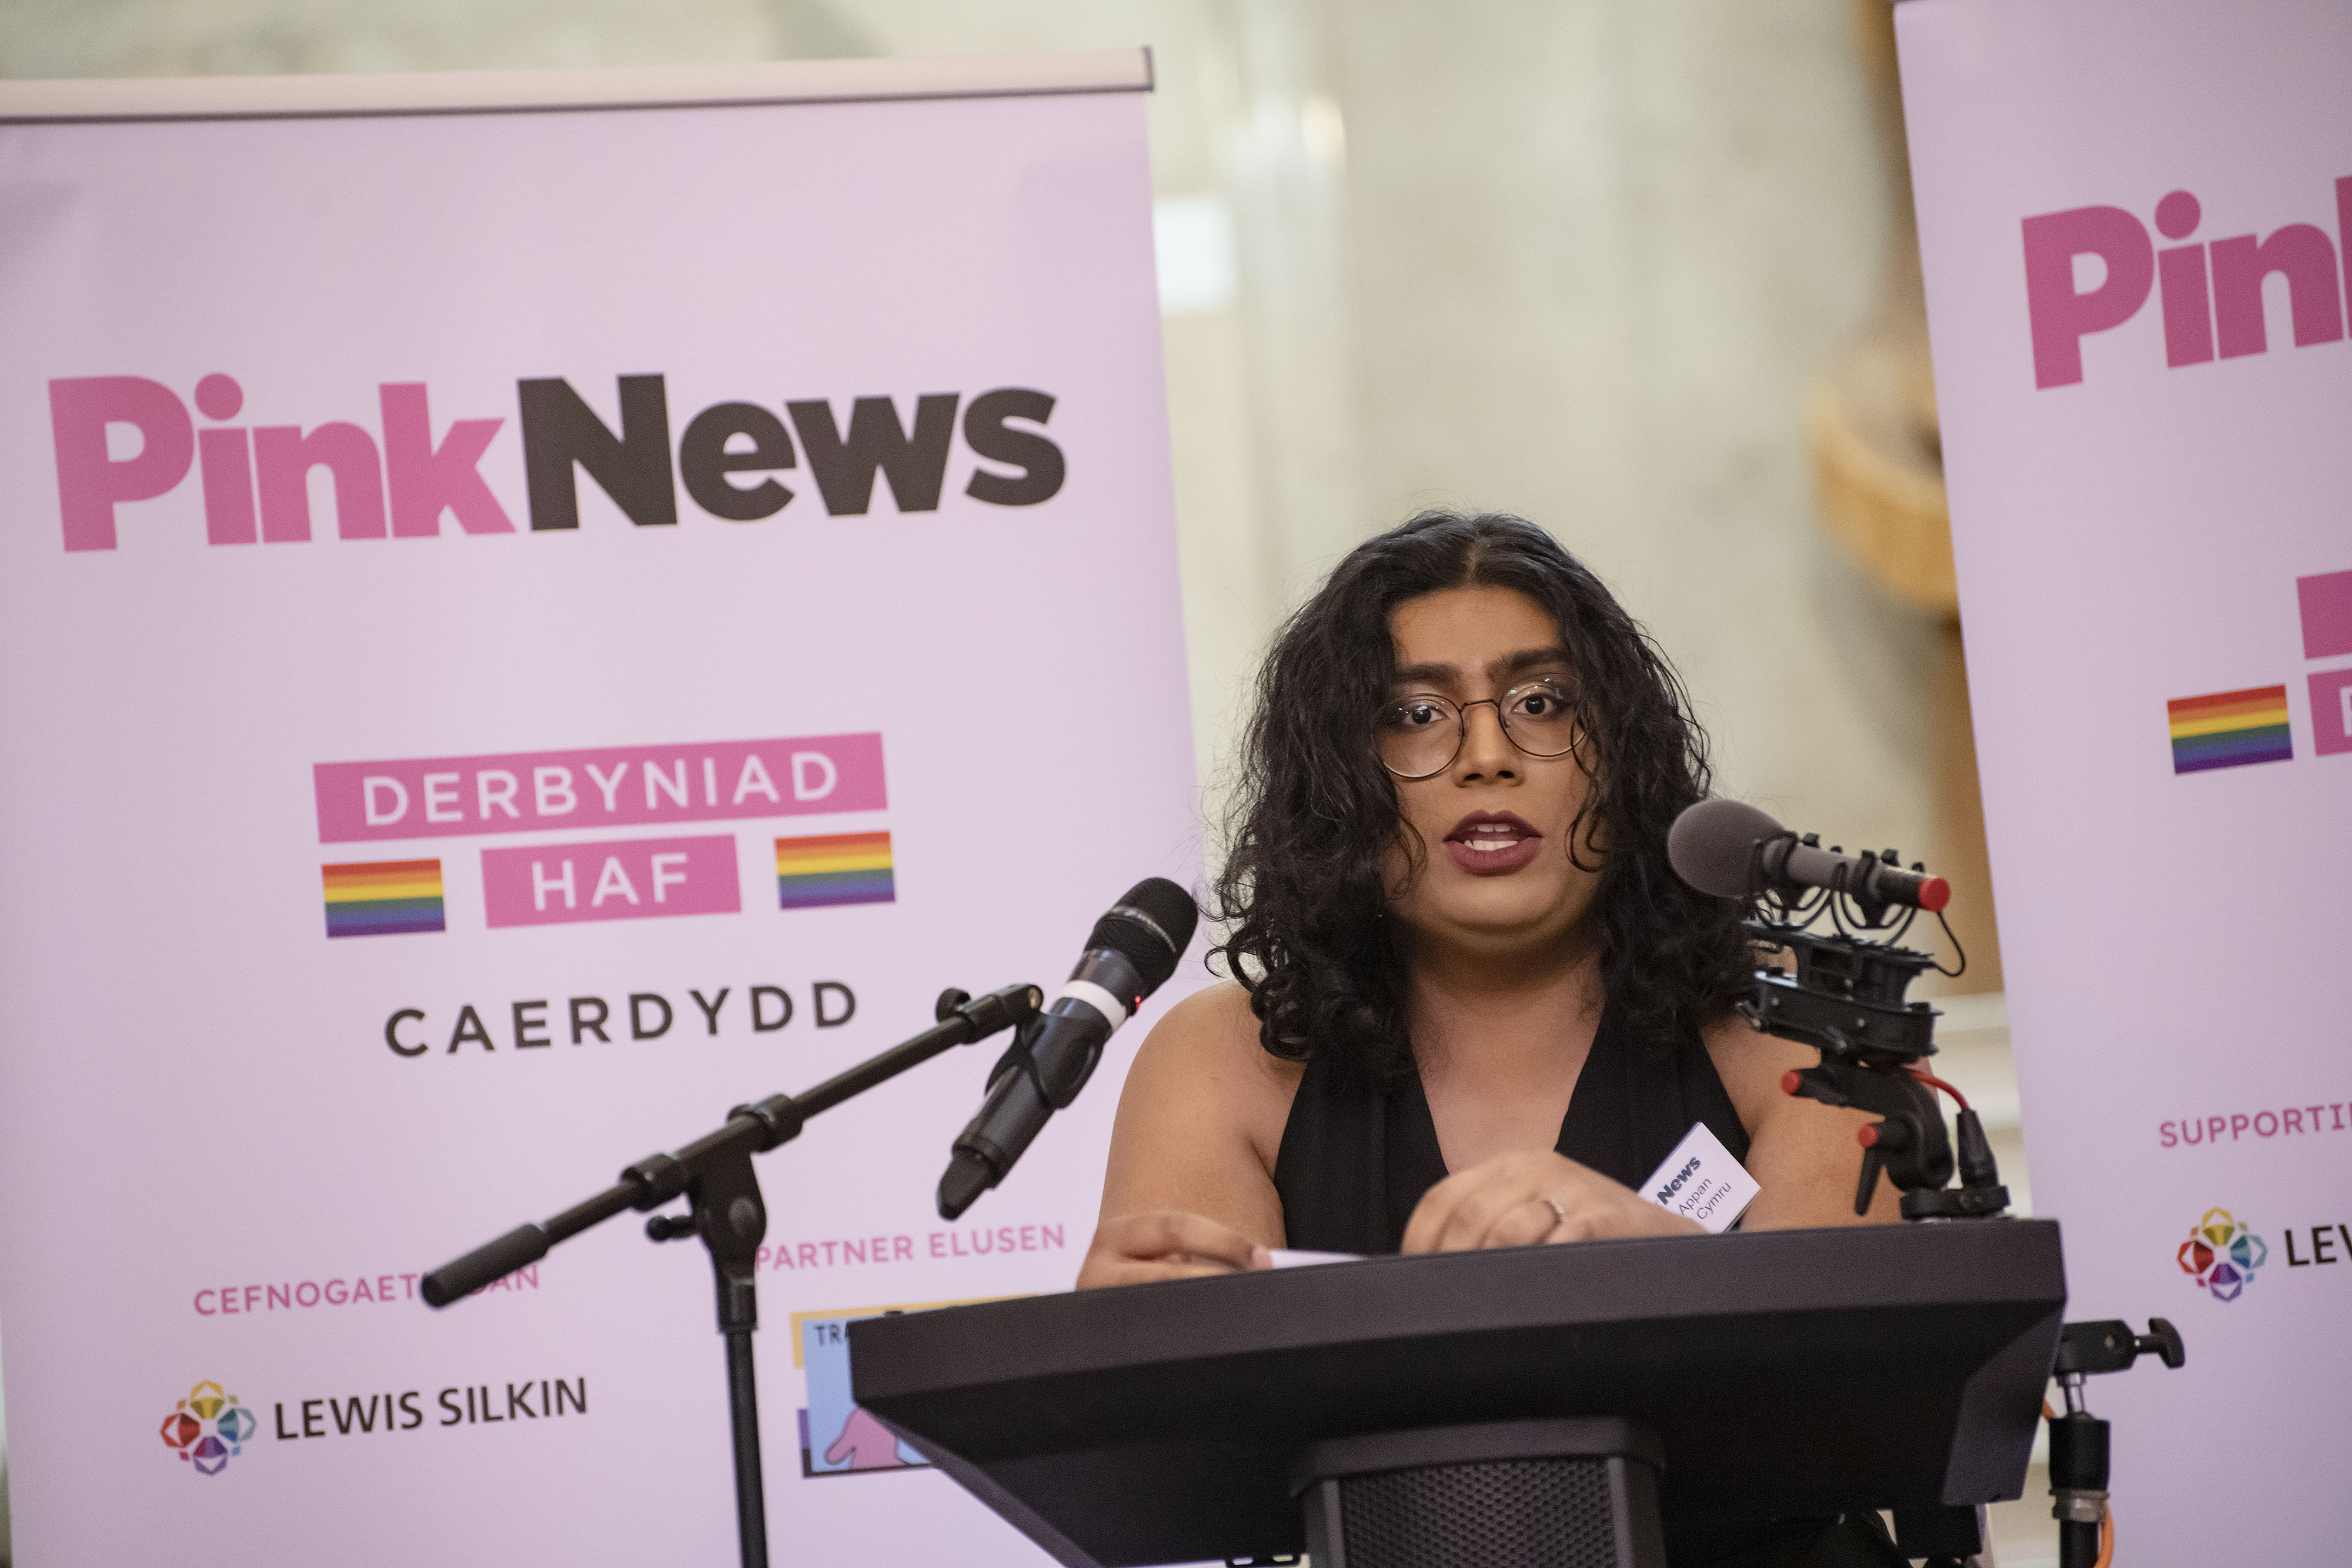 My Speech at the Pink News Cardiff Summer Reception